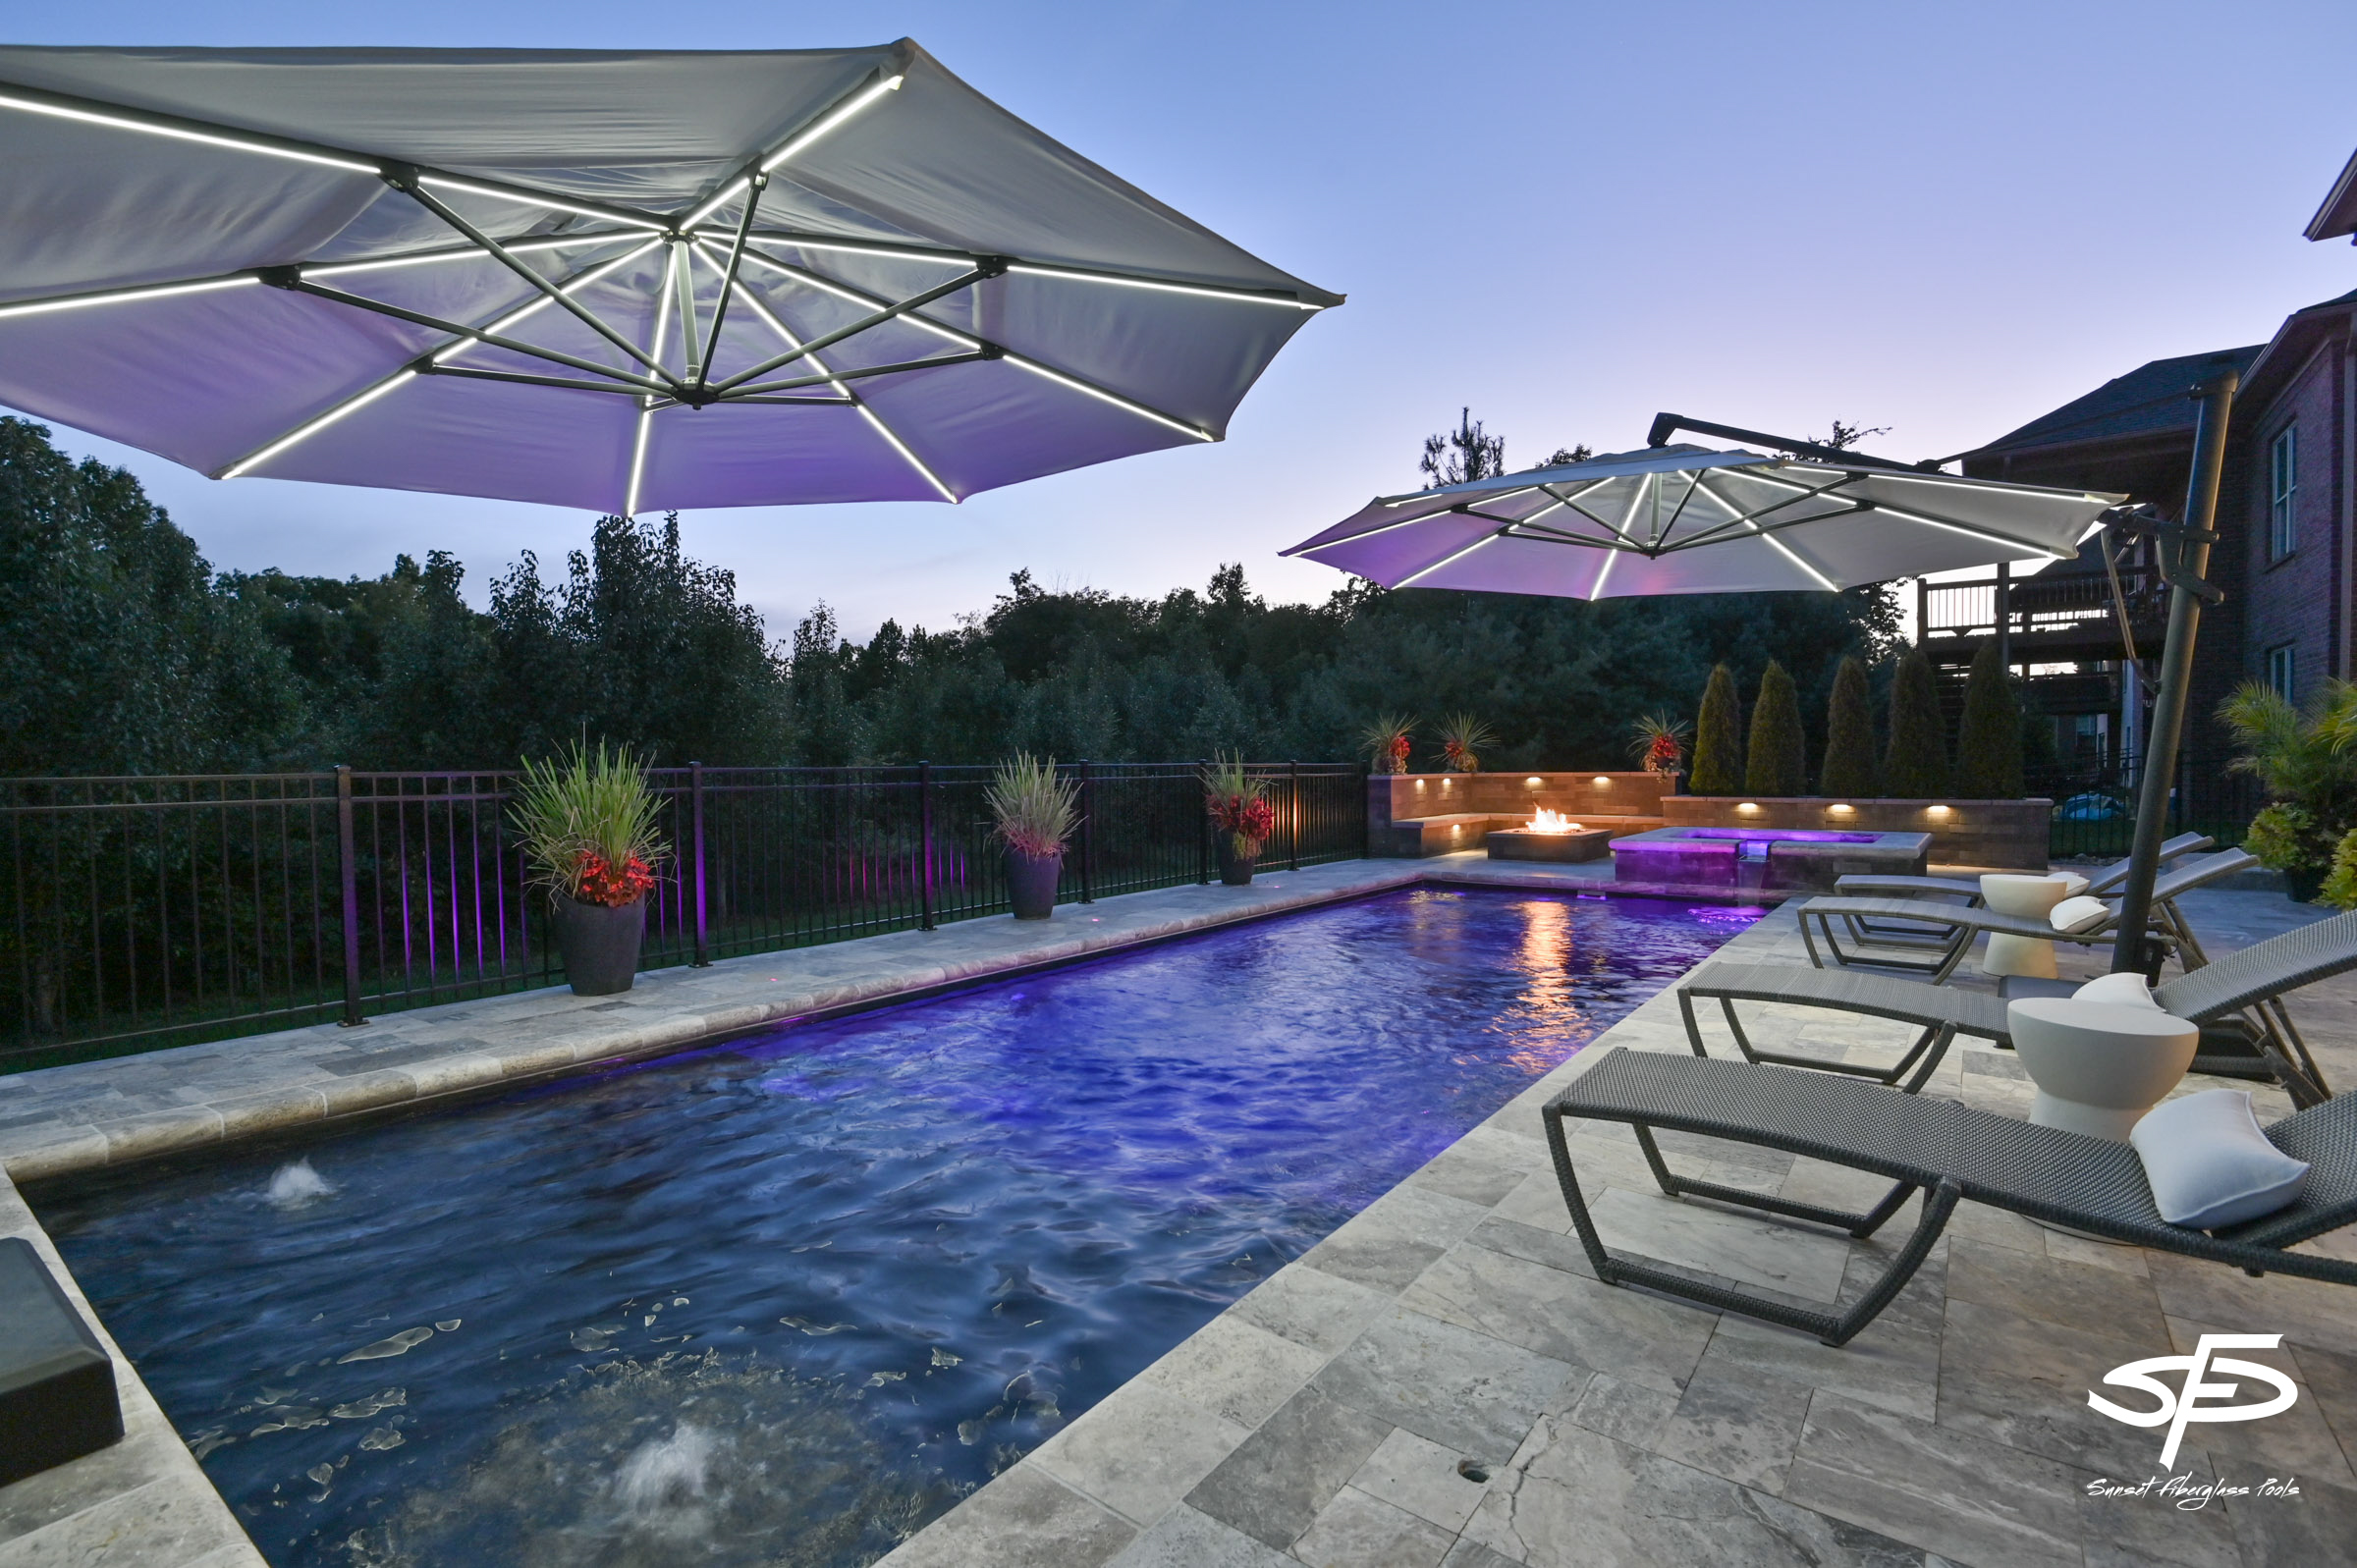 evening pool with lighting and fire pit